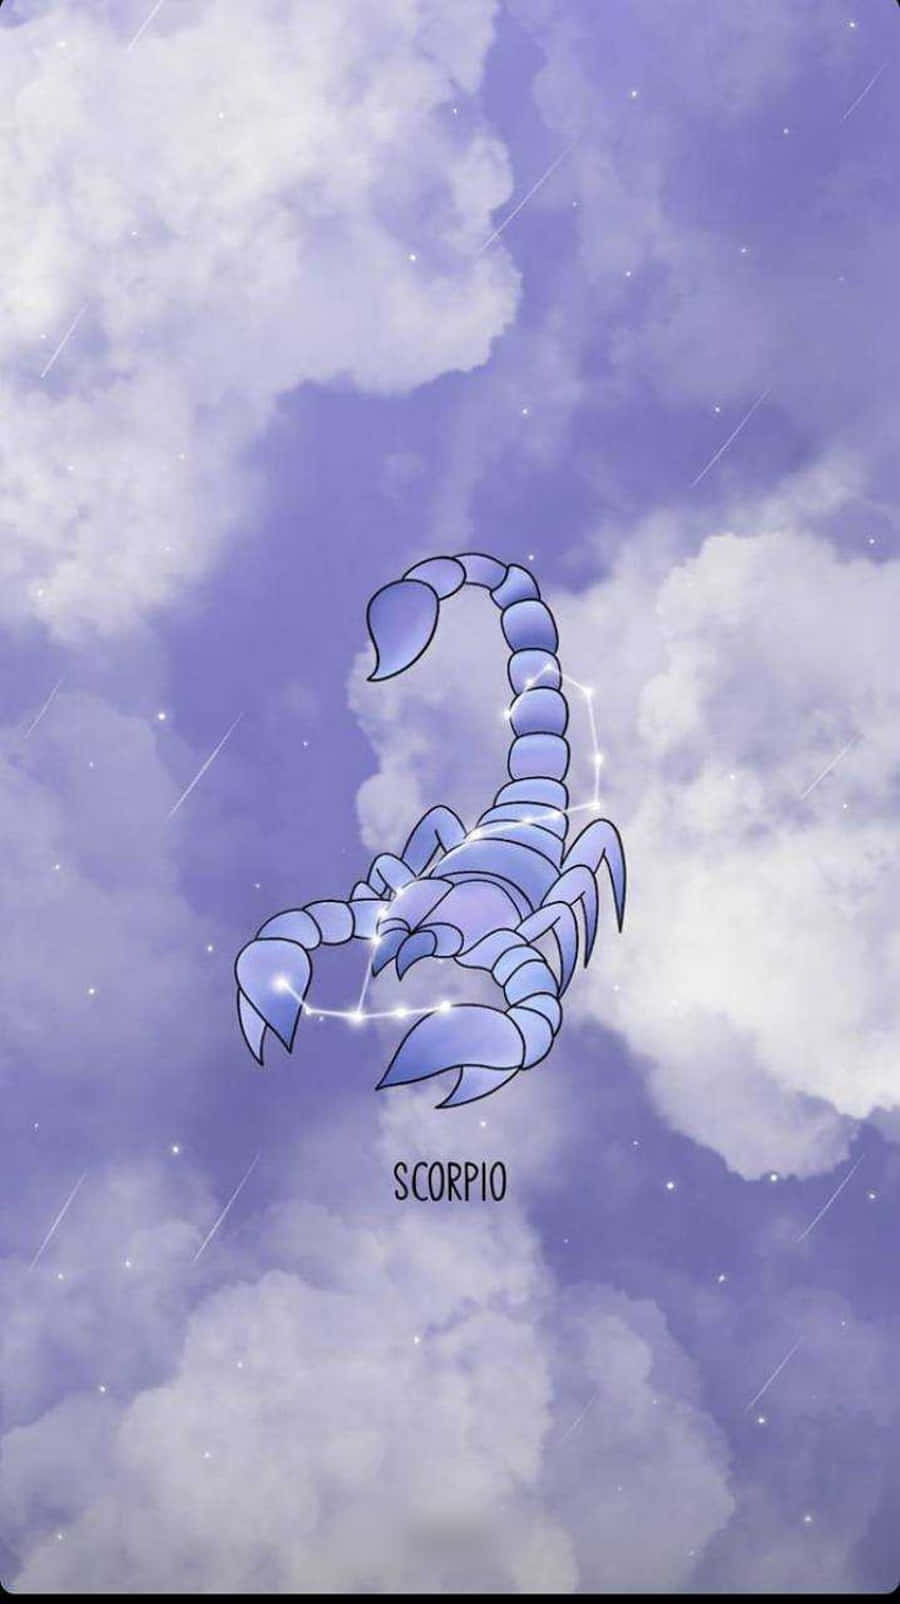 An artistic representation of the astrological sign Scorpio